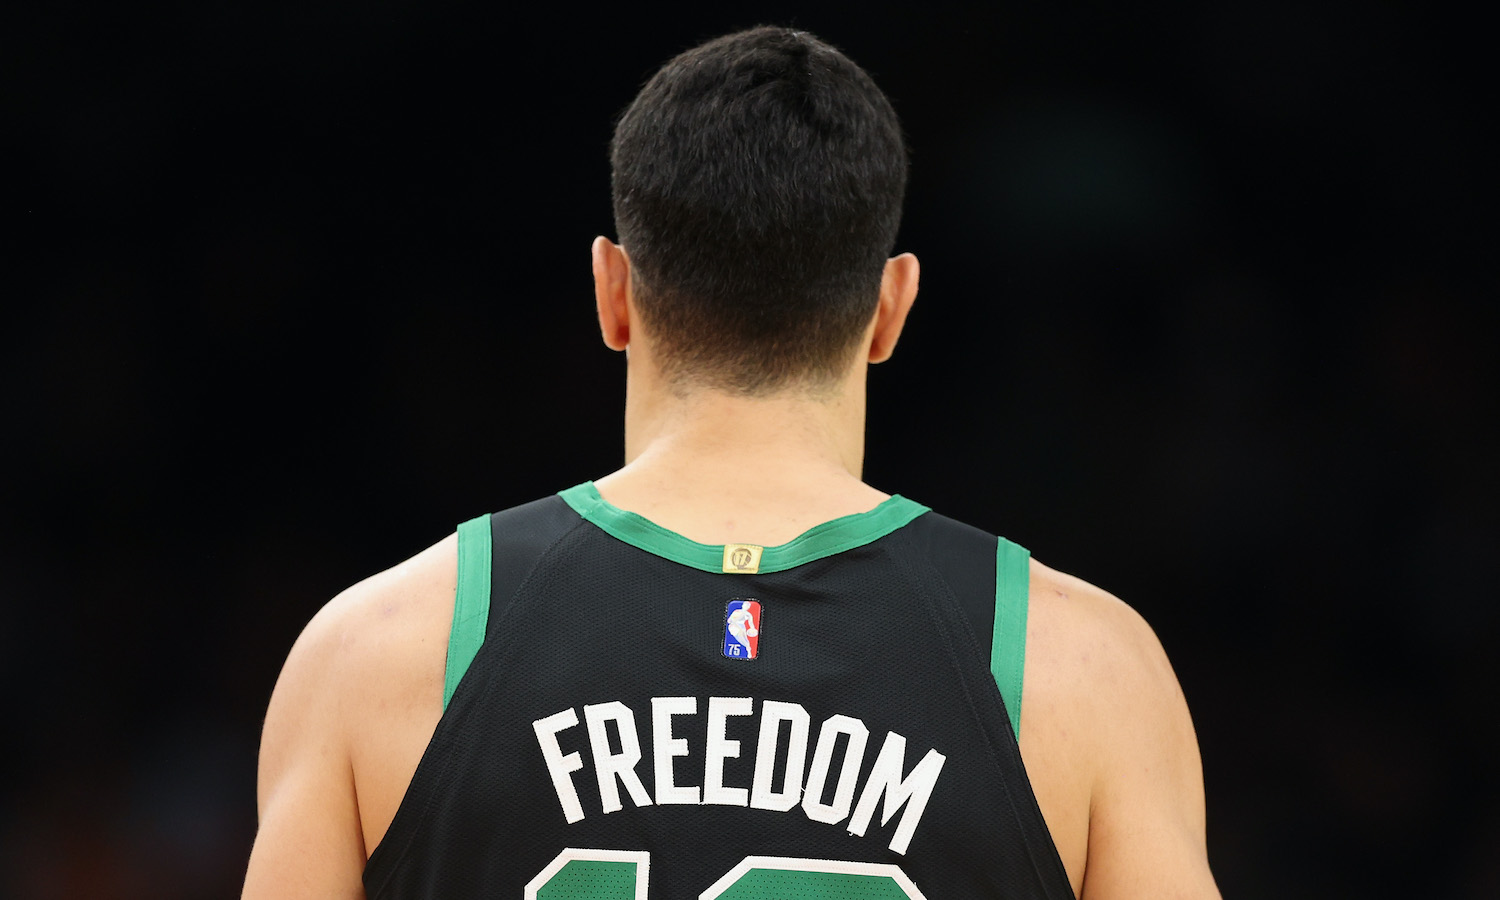 PHOENIX, ARIZONA - DECEMBER 10: Enes Freedom #13 of the Boston Celtics stands on the court during the first half of the NBA game against the Phoenix Suns at Footprint Center on December 10, 2021 in Phoenix, Arizona. NOTE TO USER: User expressly acknowledges and agrees that, by downloading and or using this photograph, User is consenting to the terms and conditions of the Getty Images License Agreement. (Photo by Christian Petersen/Getty Images)